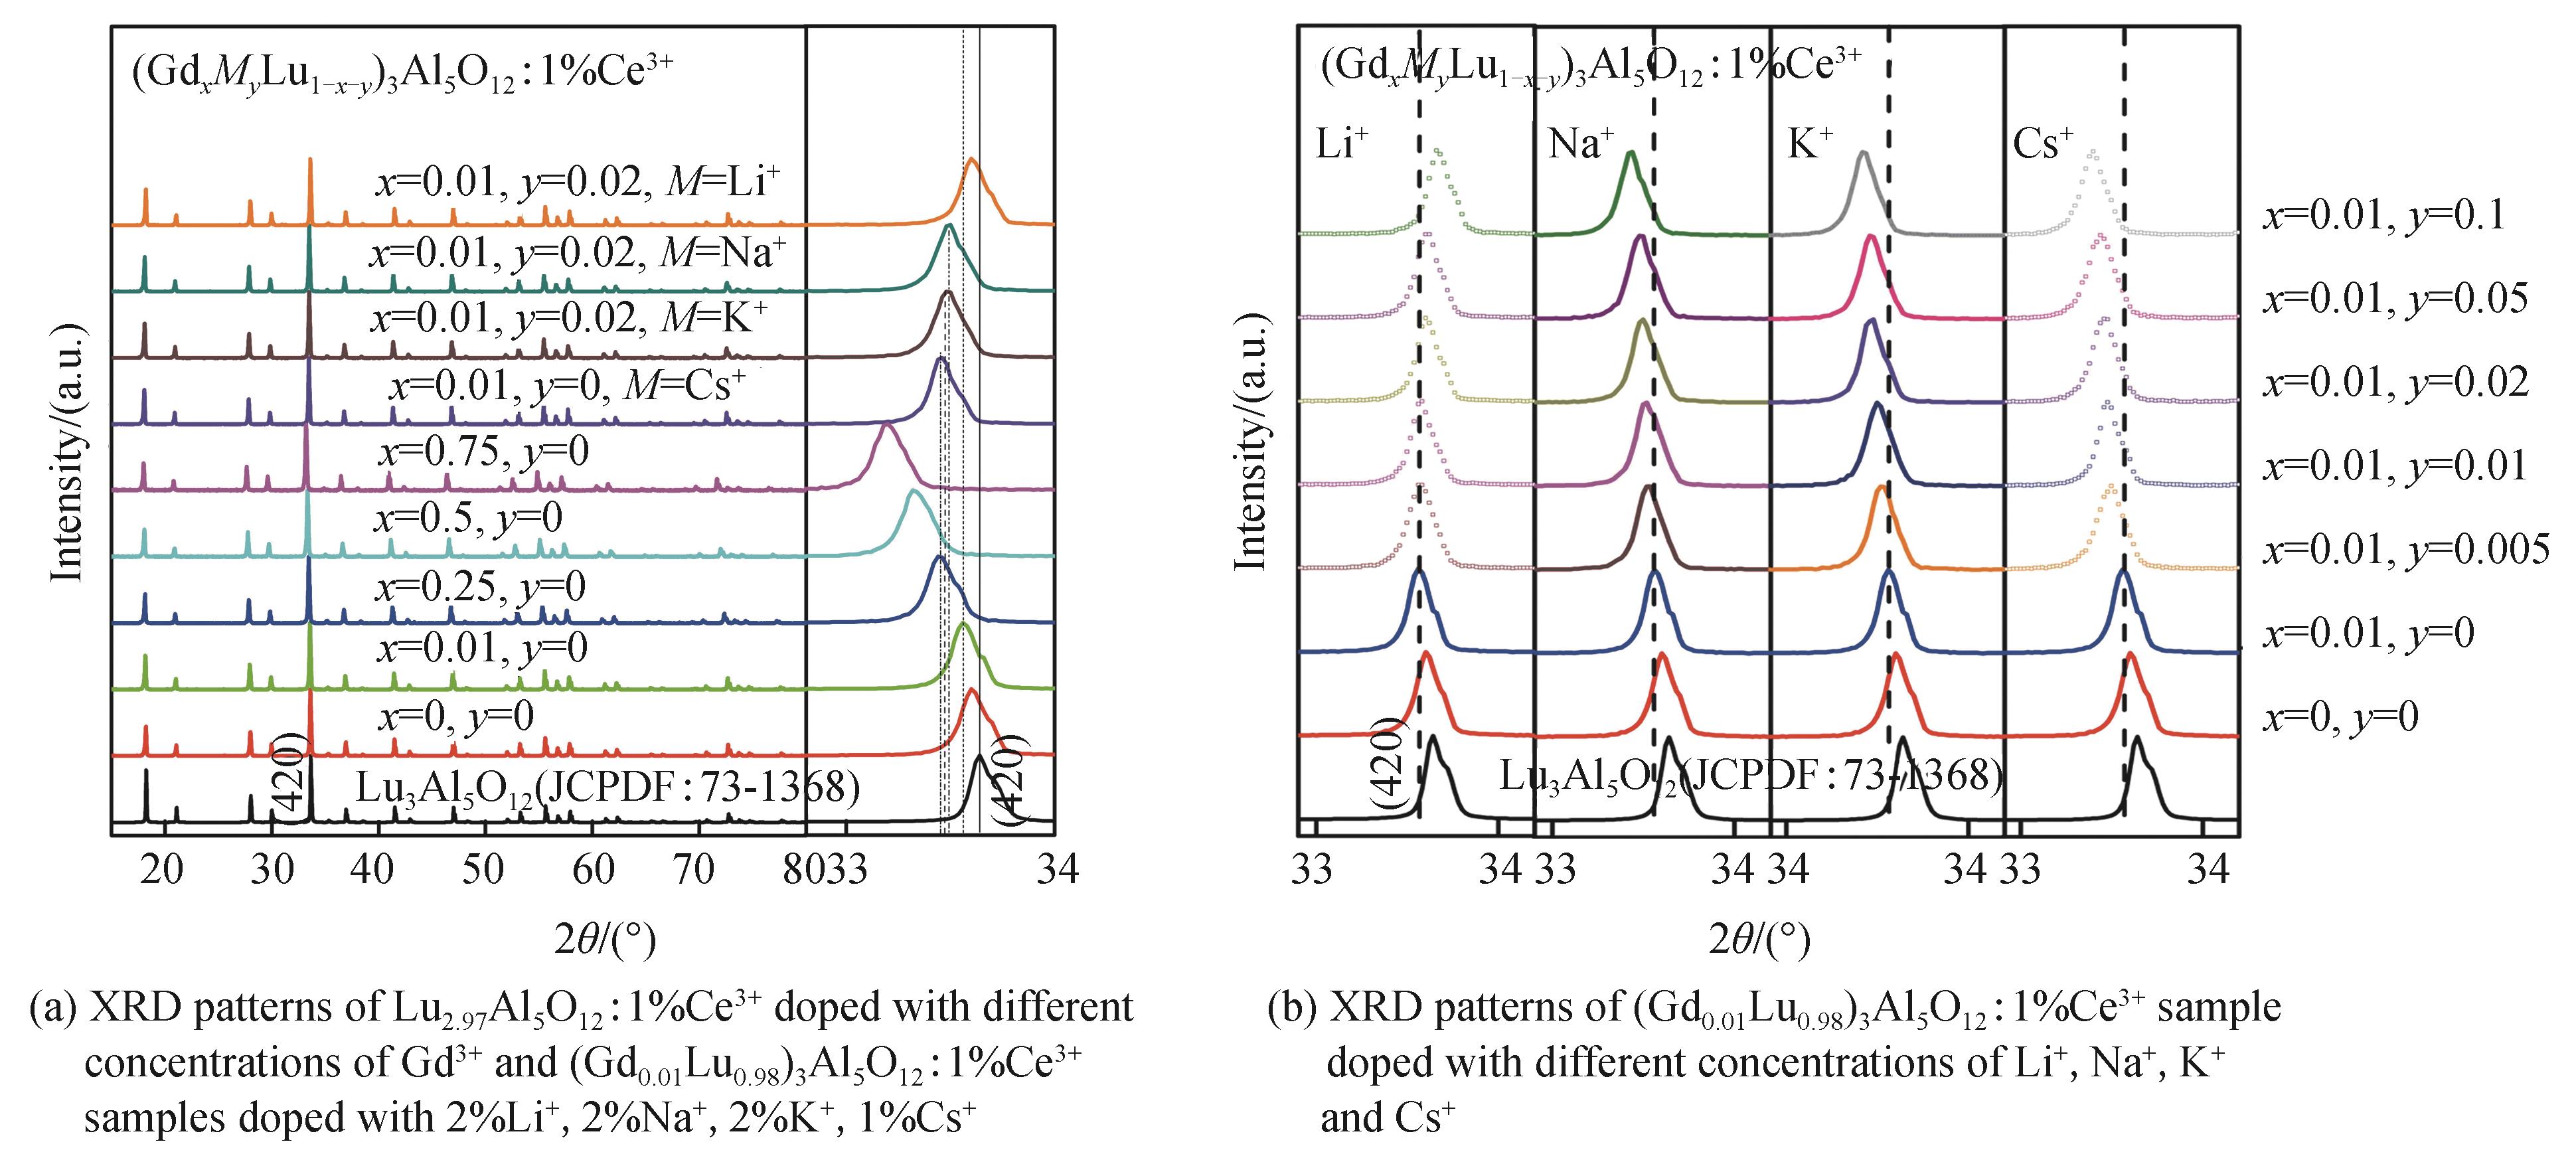 XRD patterns of different concentrations of alkali metal ions and Gd3+ doped in Lu2.97Al5O12：1%Ce3+ sample